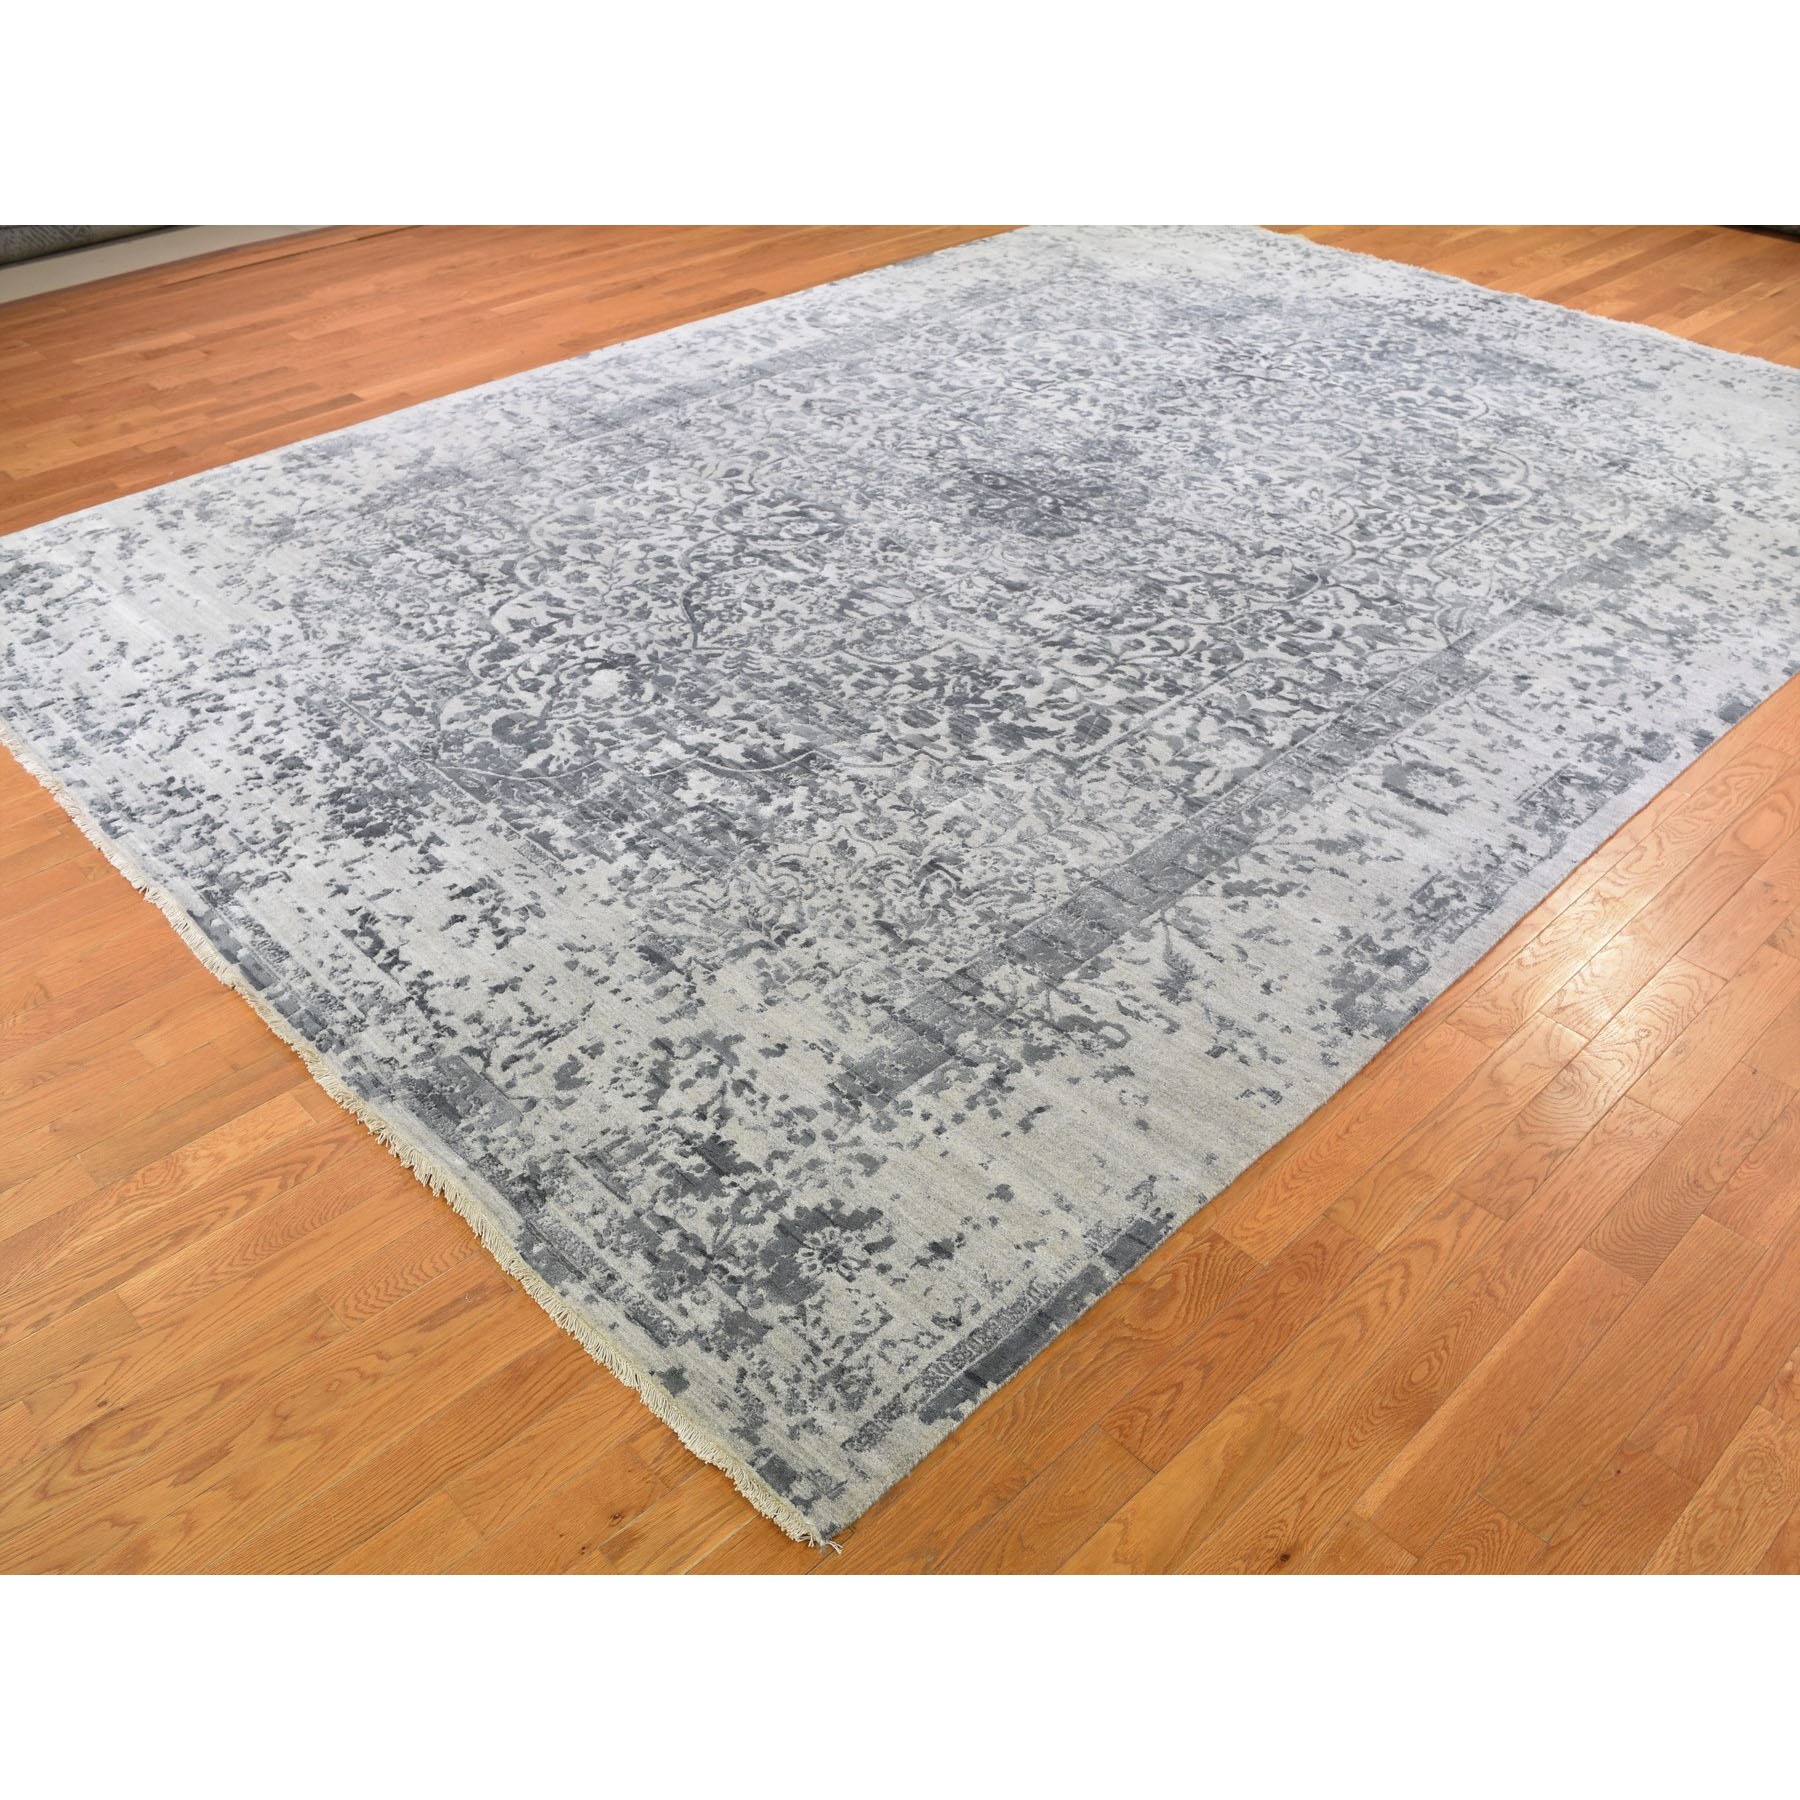 10-x14- Silver-Dark Gray Erased Persian Design Wool and Pure Silk Hand Knotted Oriental Rug 